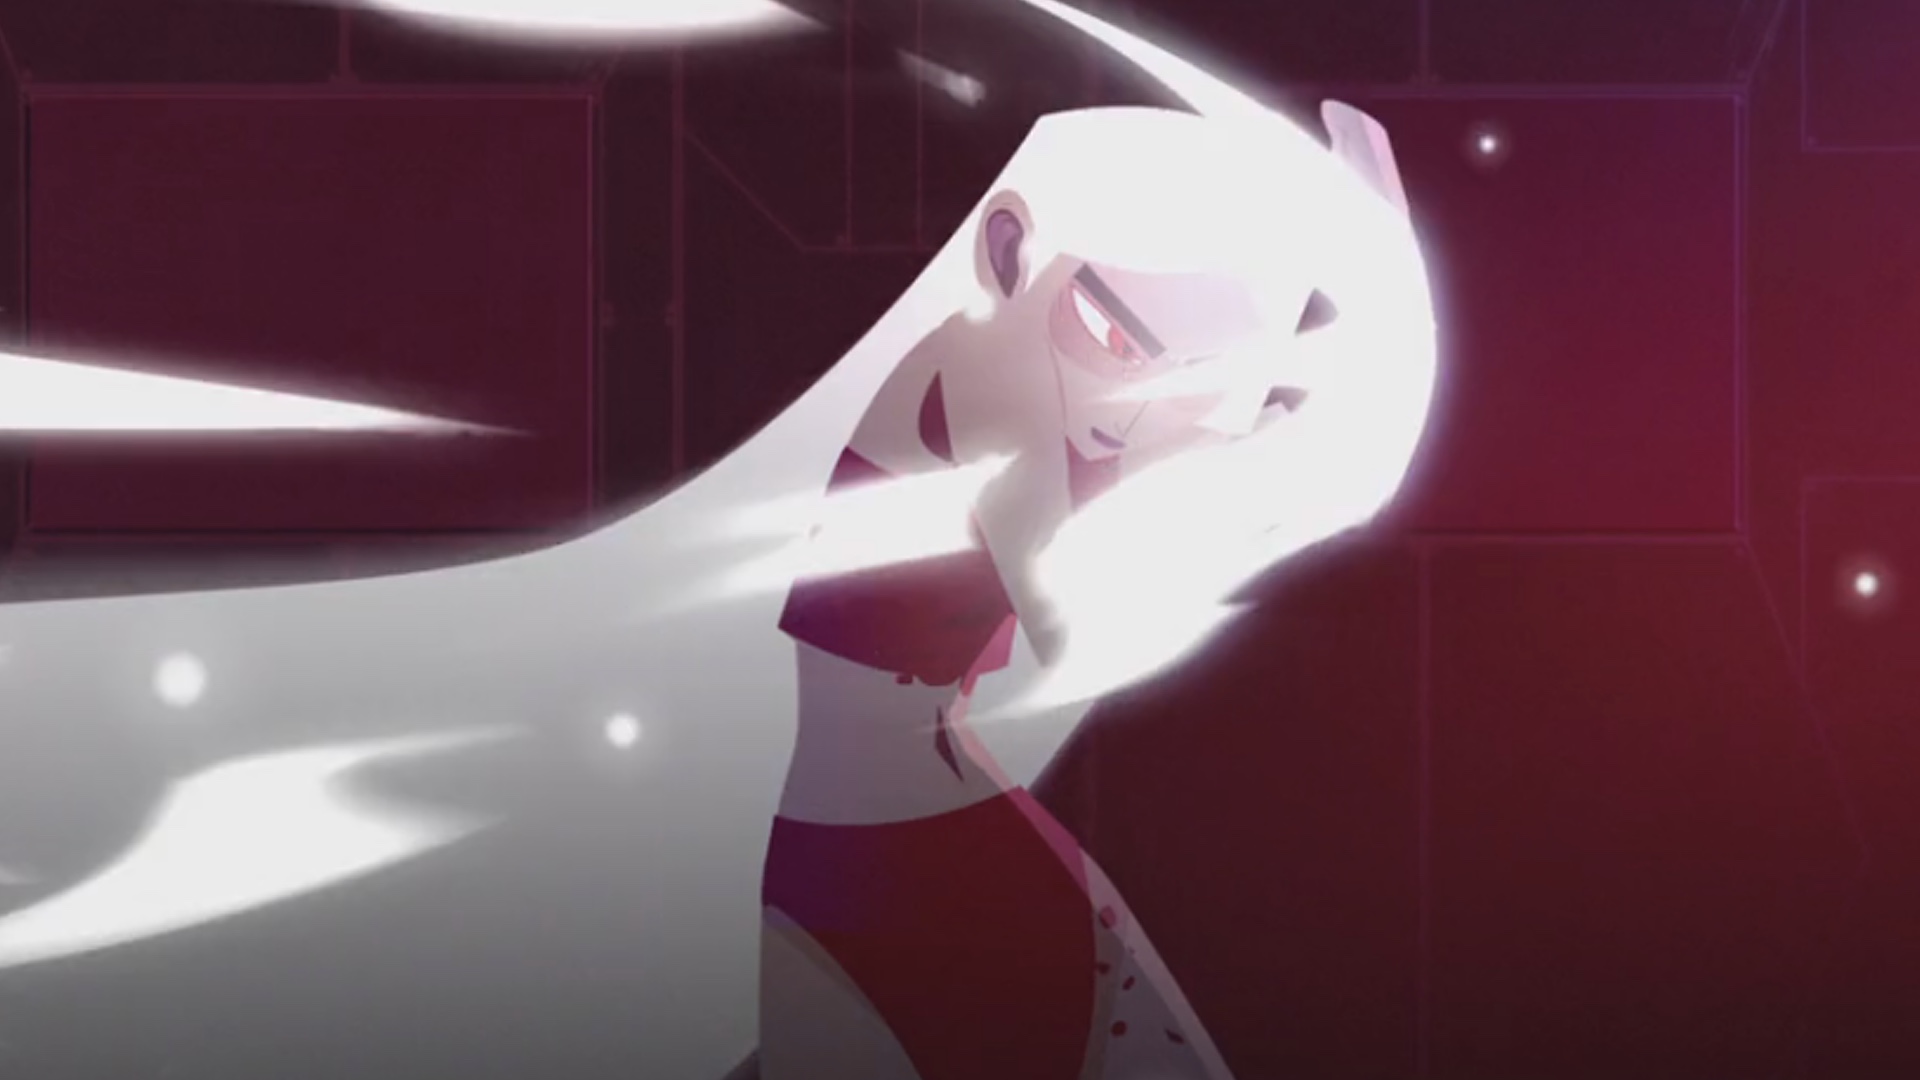 This Sci-Fi Animated Short OURO Is a Supernatural Tale of Vengeance —  GeekTyrant